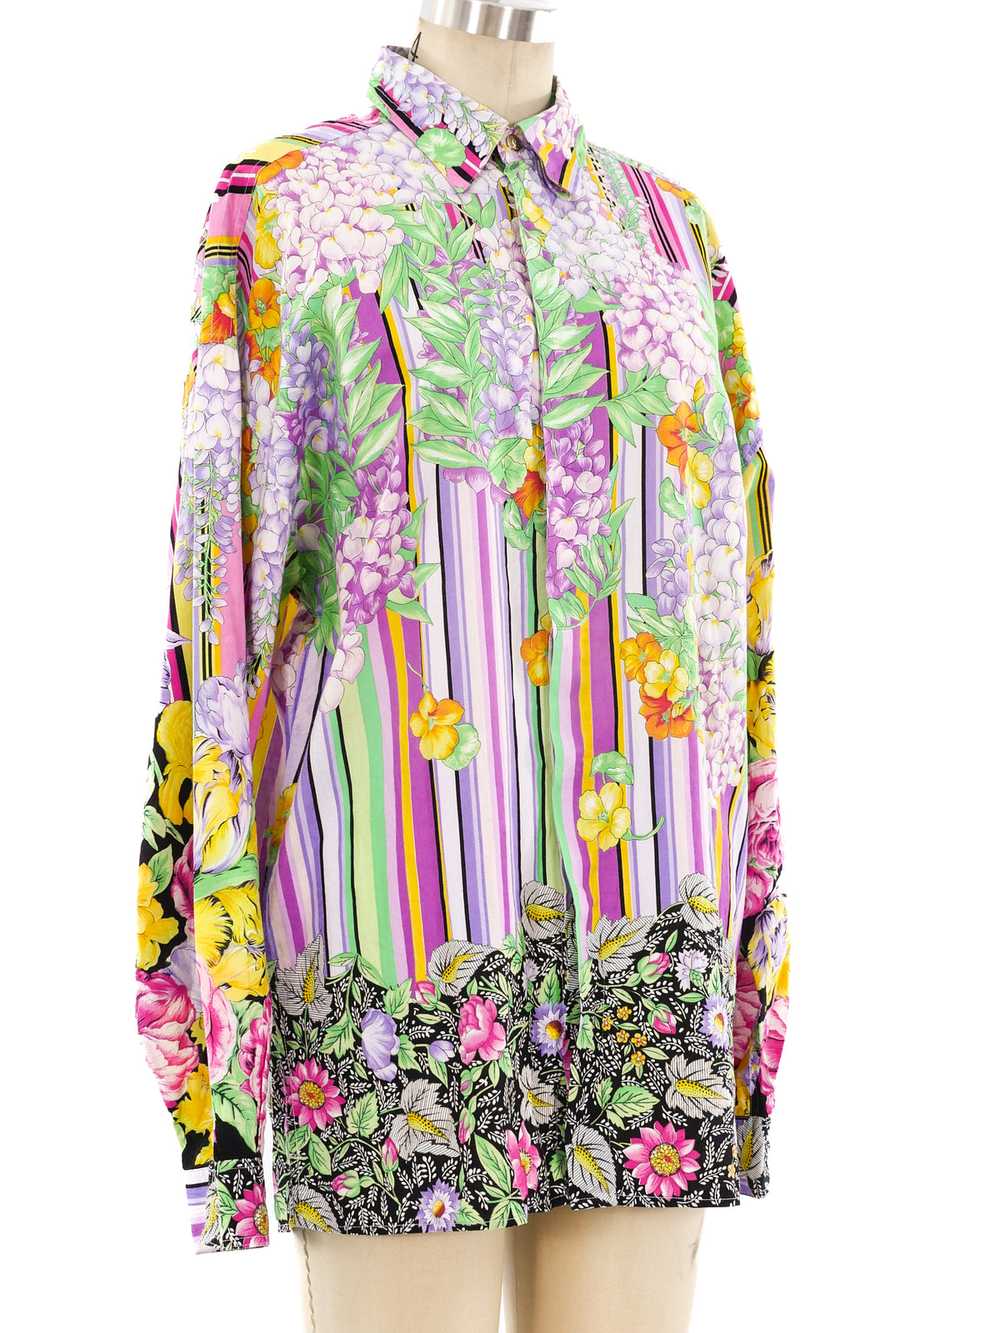 Versus by Gianni Versace Floral Printed Shirt - image 3